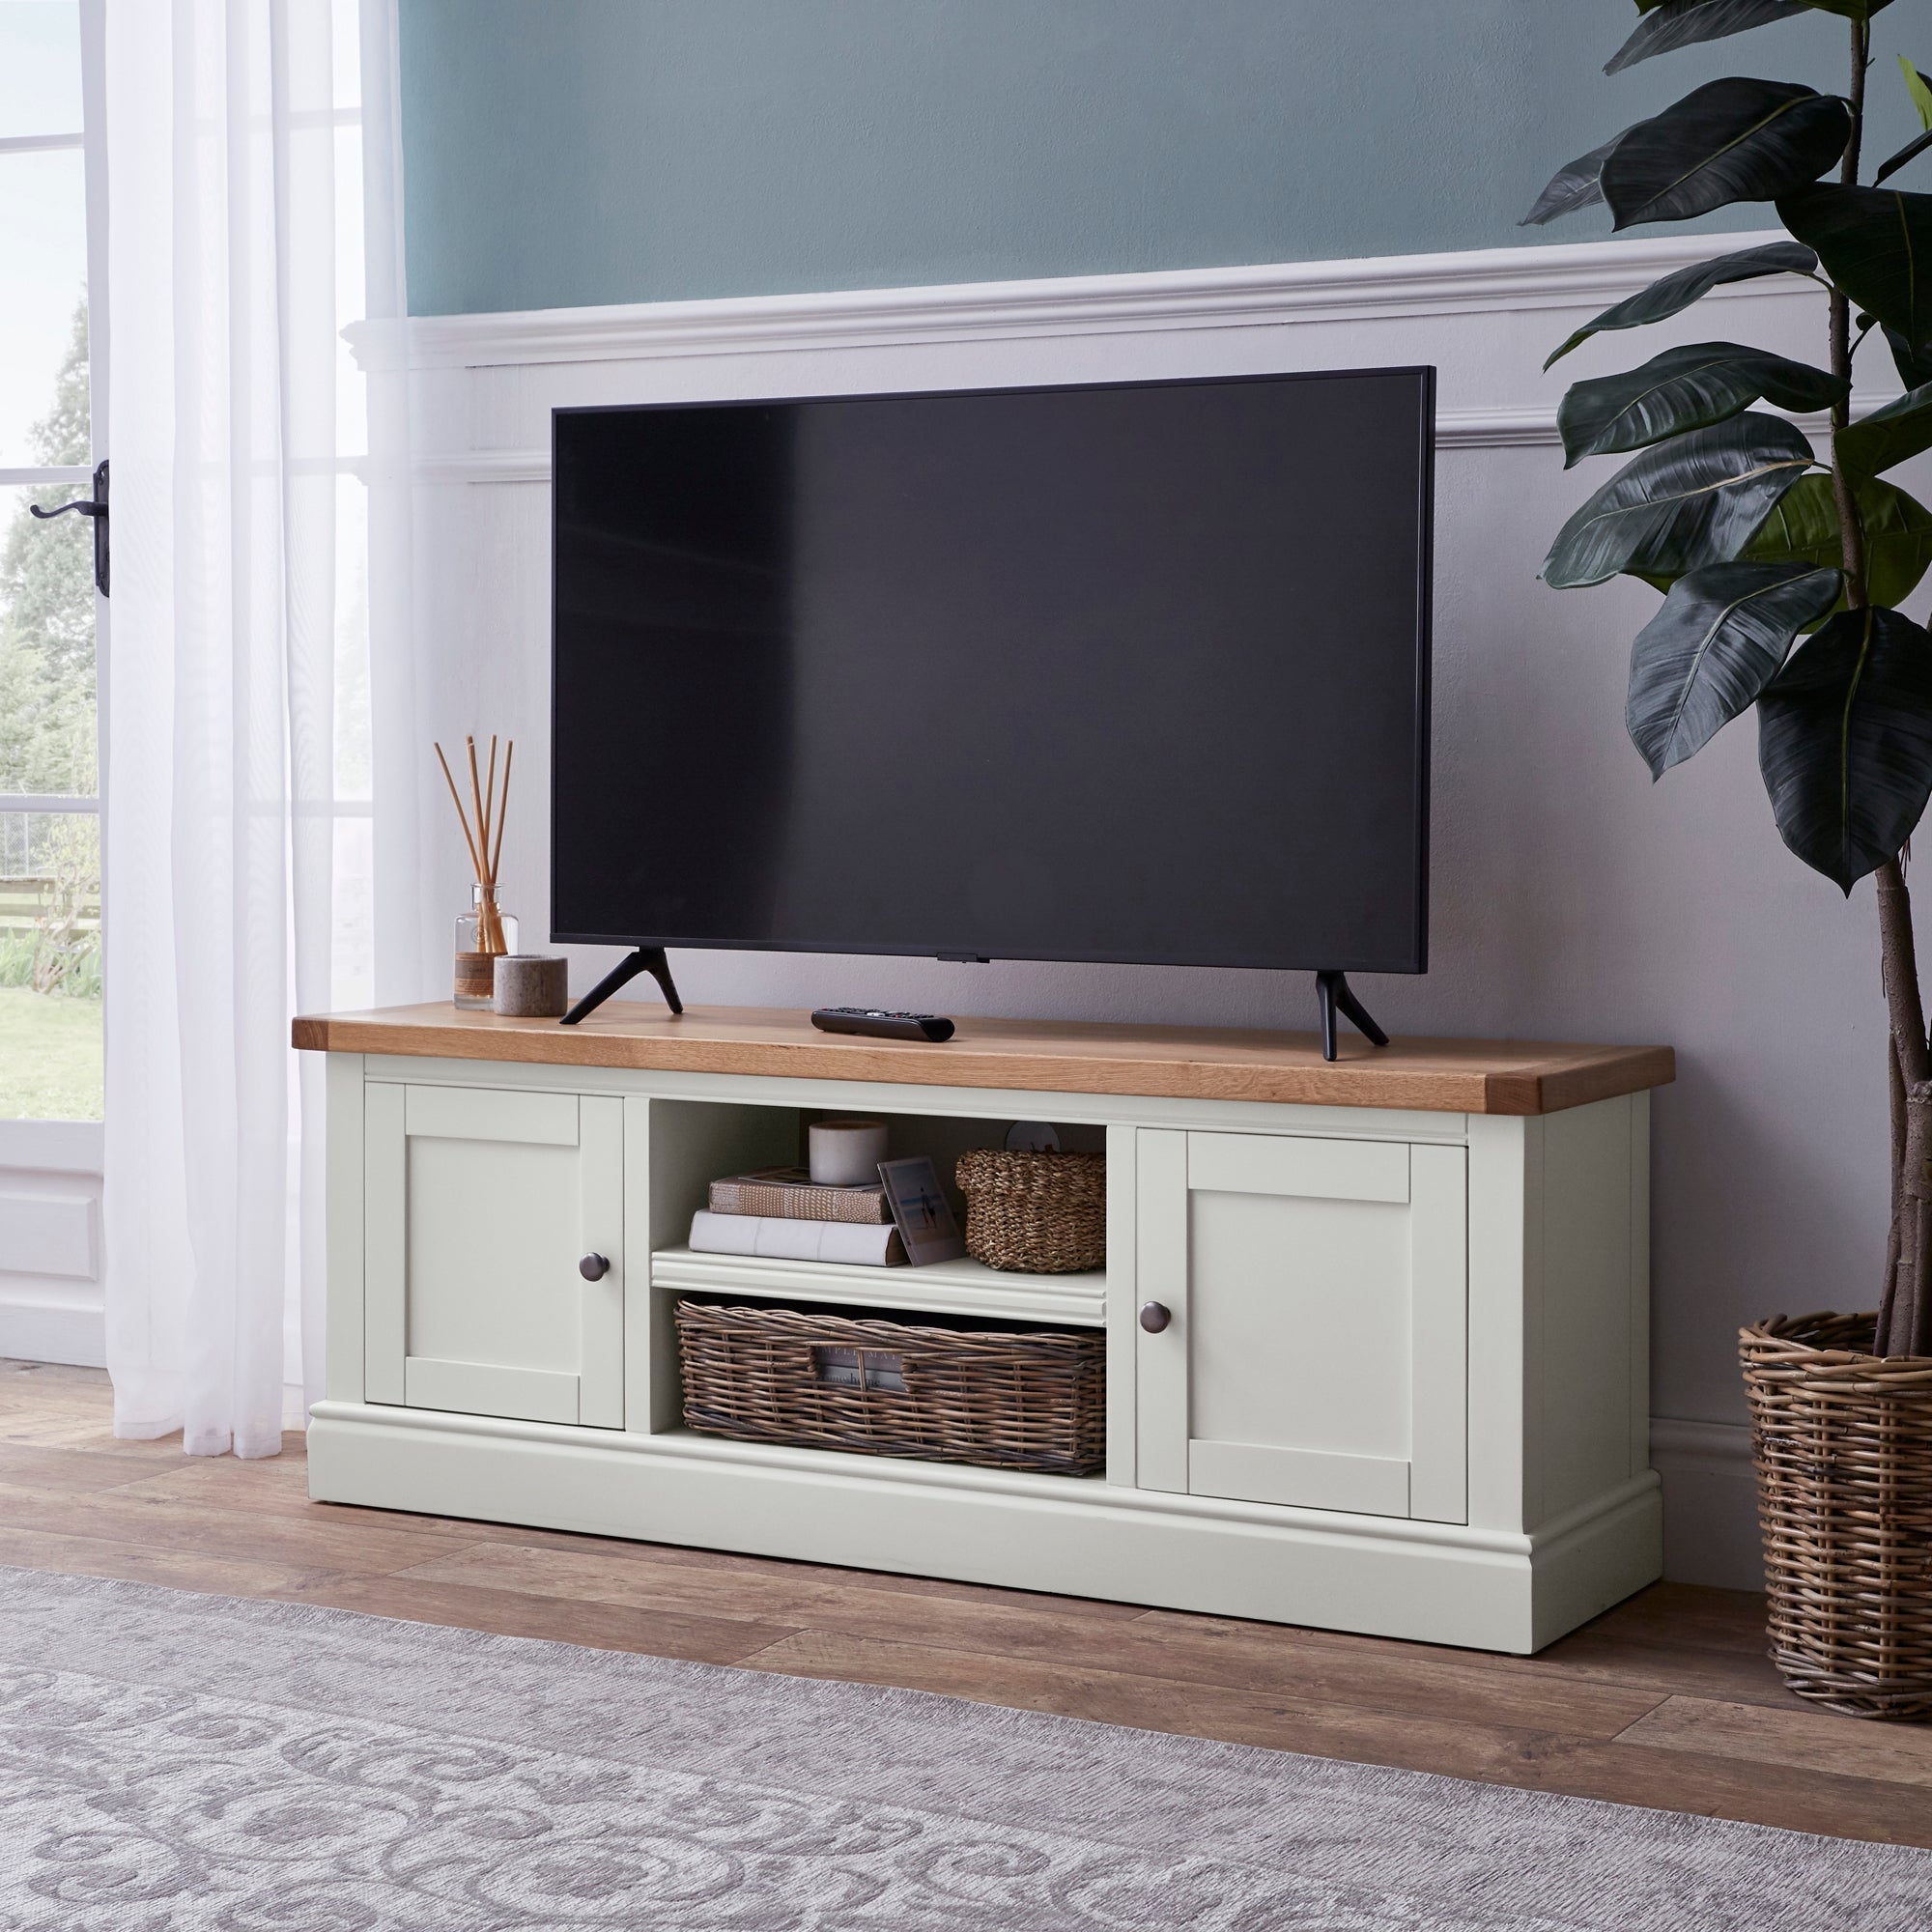 Compton Ivory Wide TV Unit with Baskets for TVs up to 60"